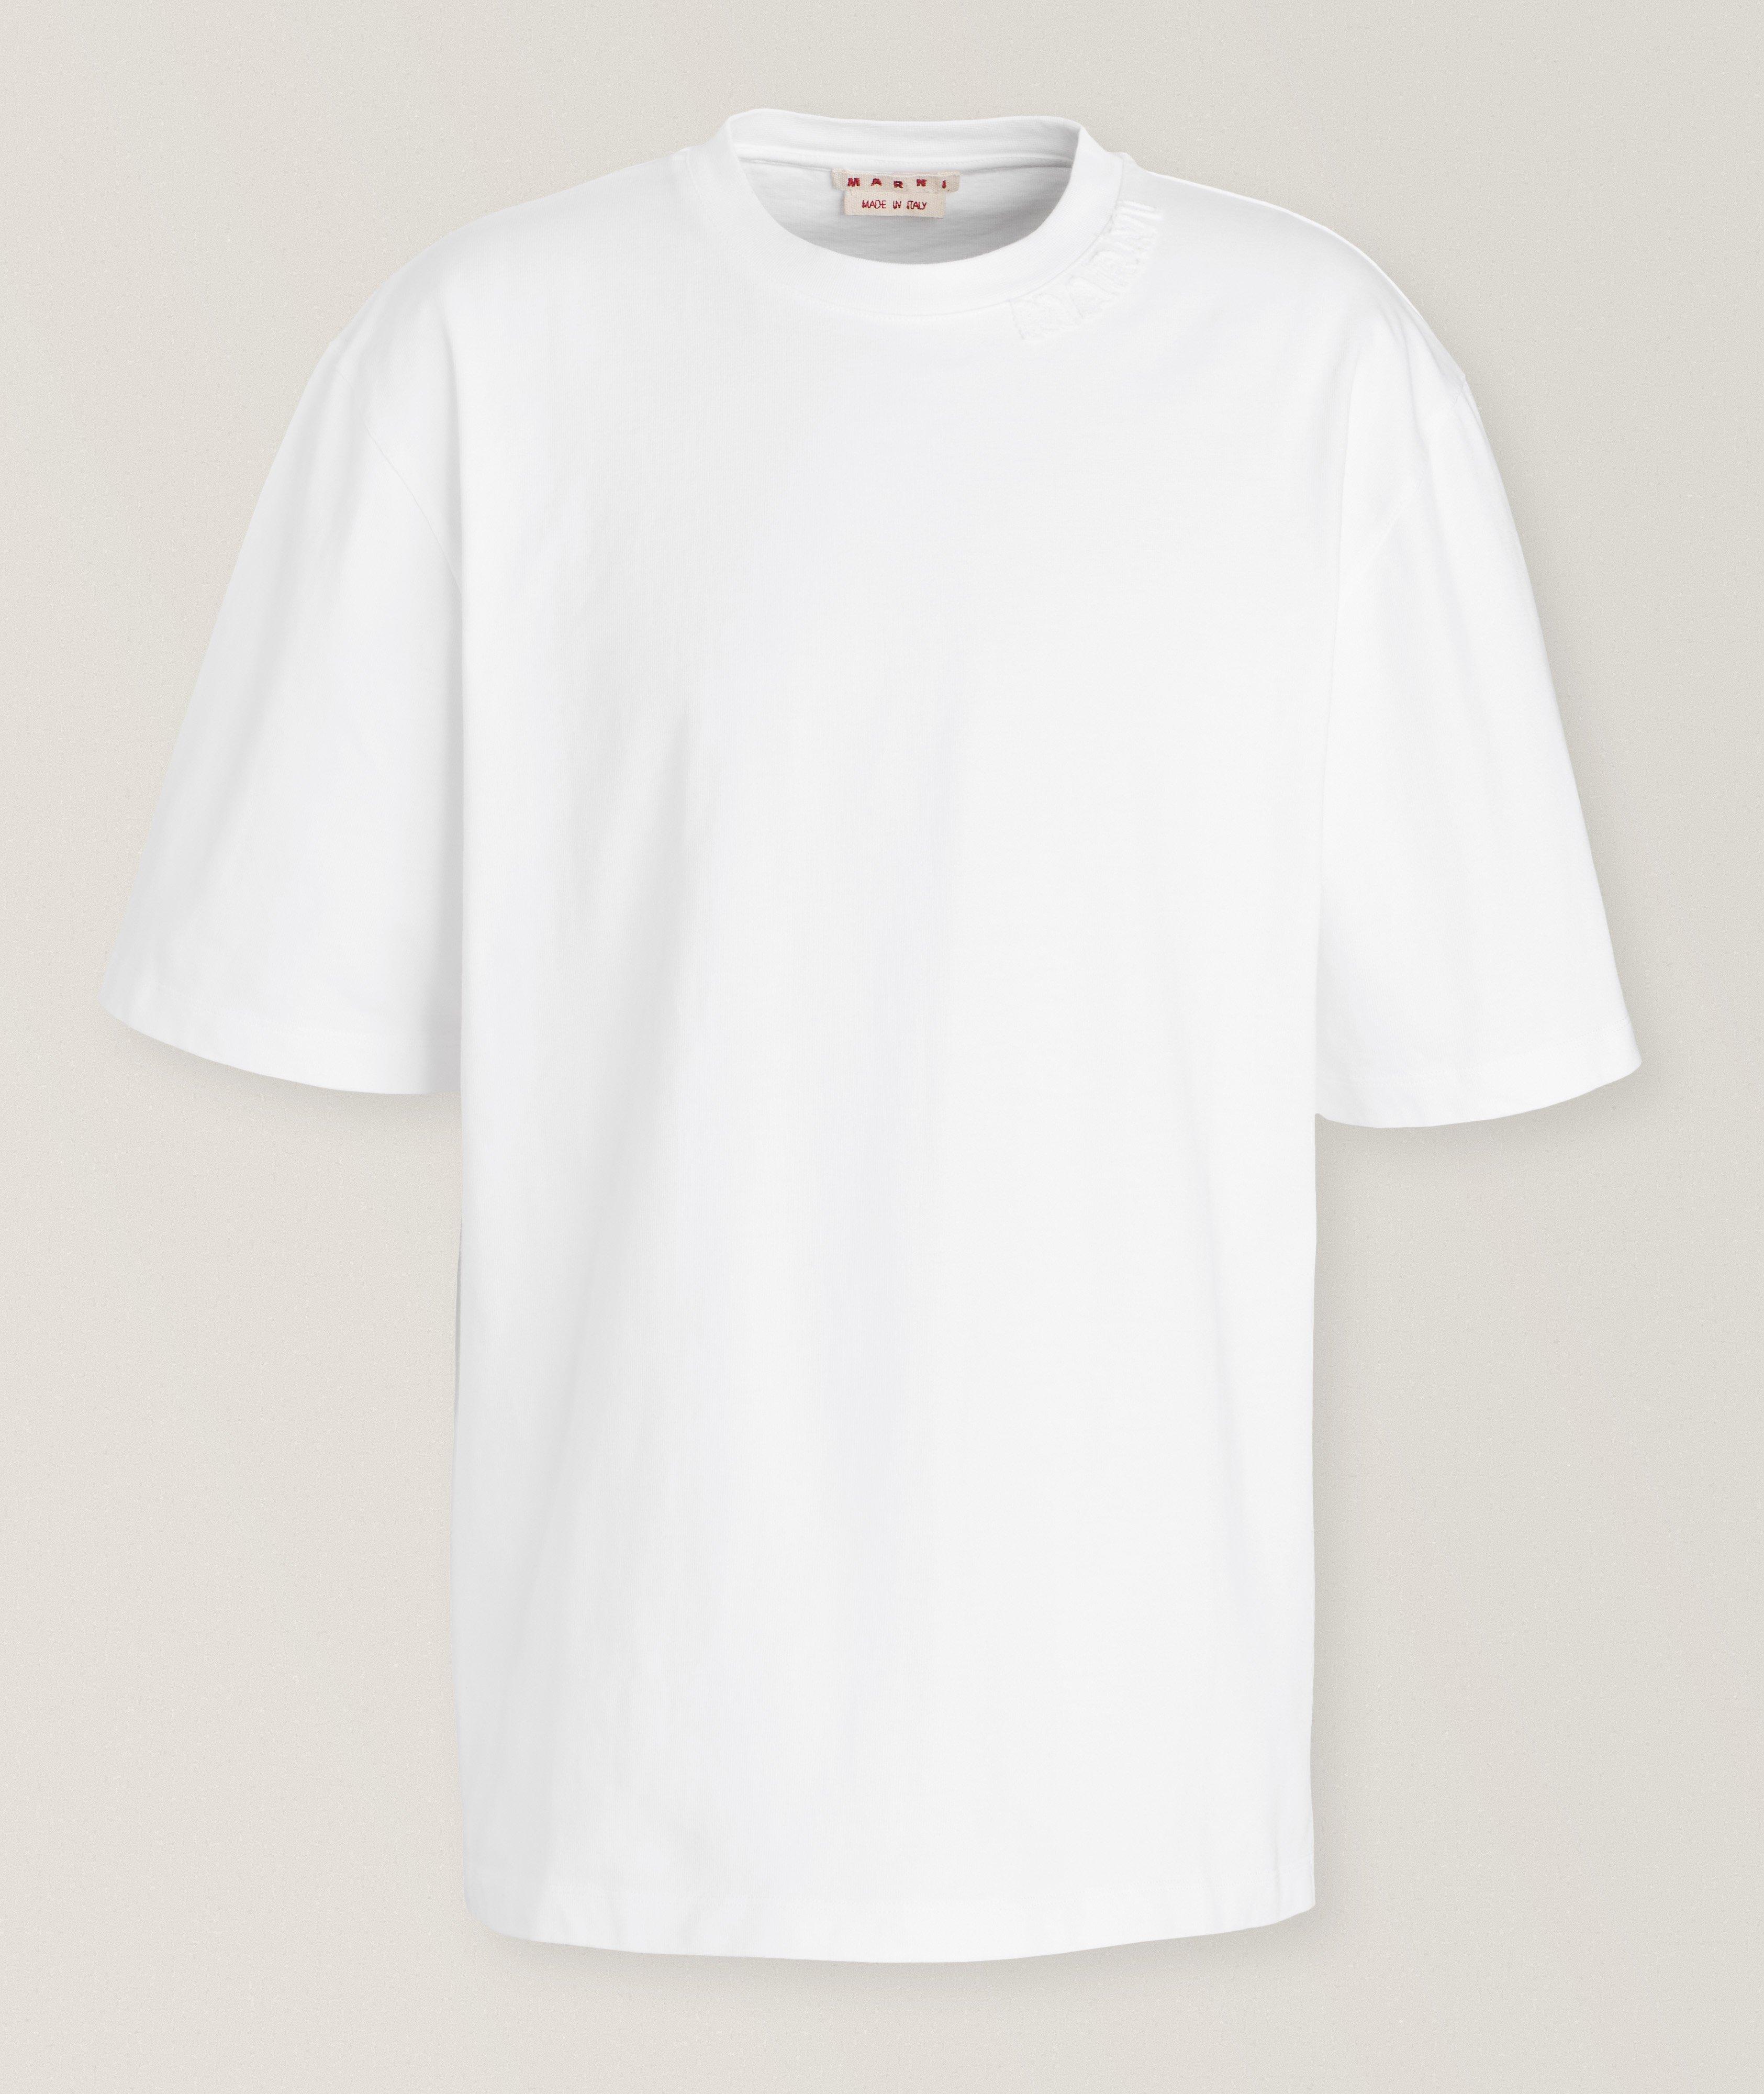 Raised Logo Weighted Cotton T-Shirt  image 0